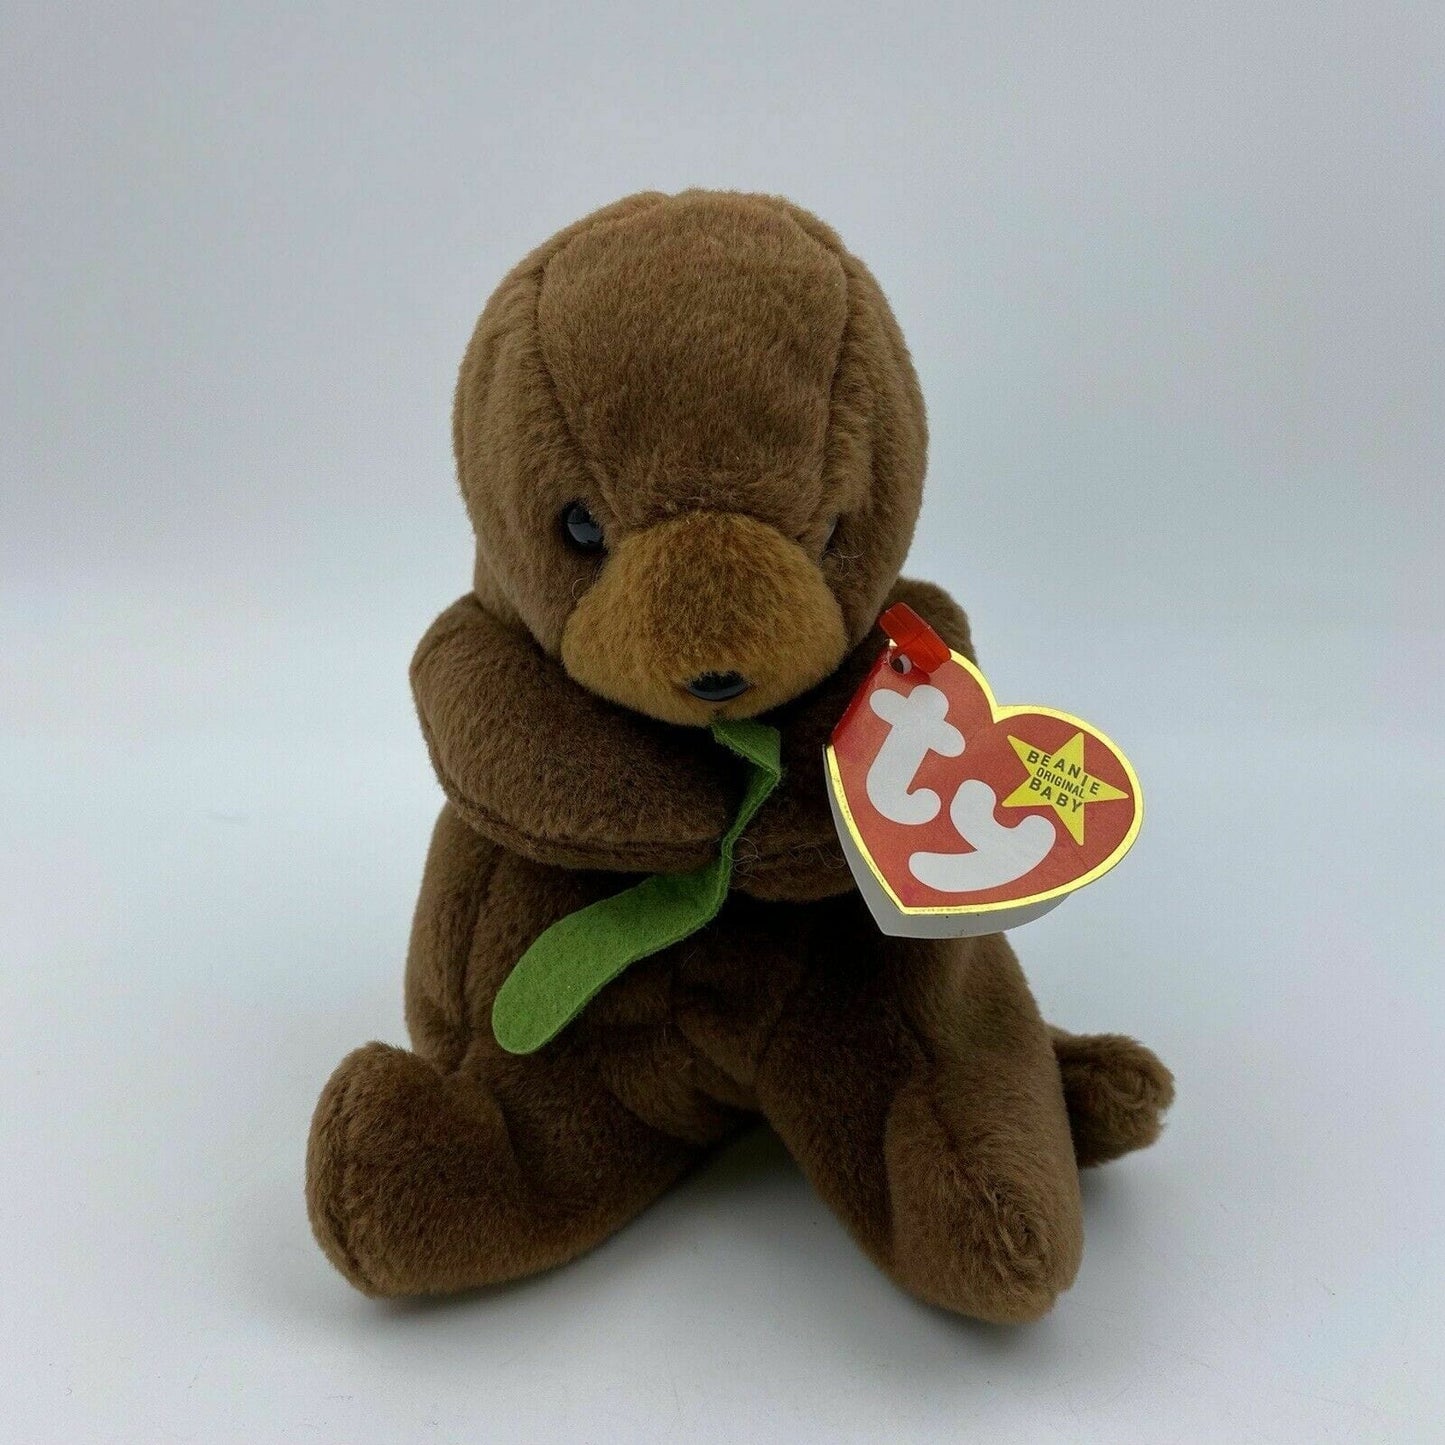 Ty Original Beanie Babies “Seaweed” The Otter 1995 MINT Condition - Tag Errors